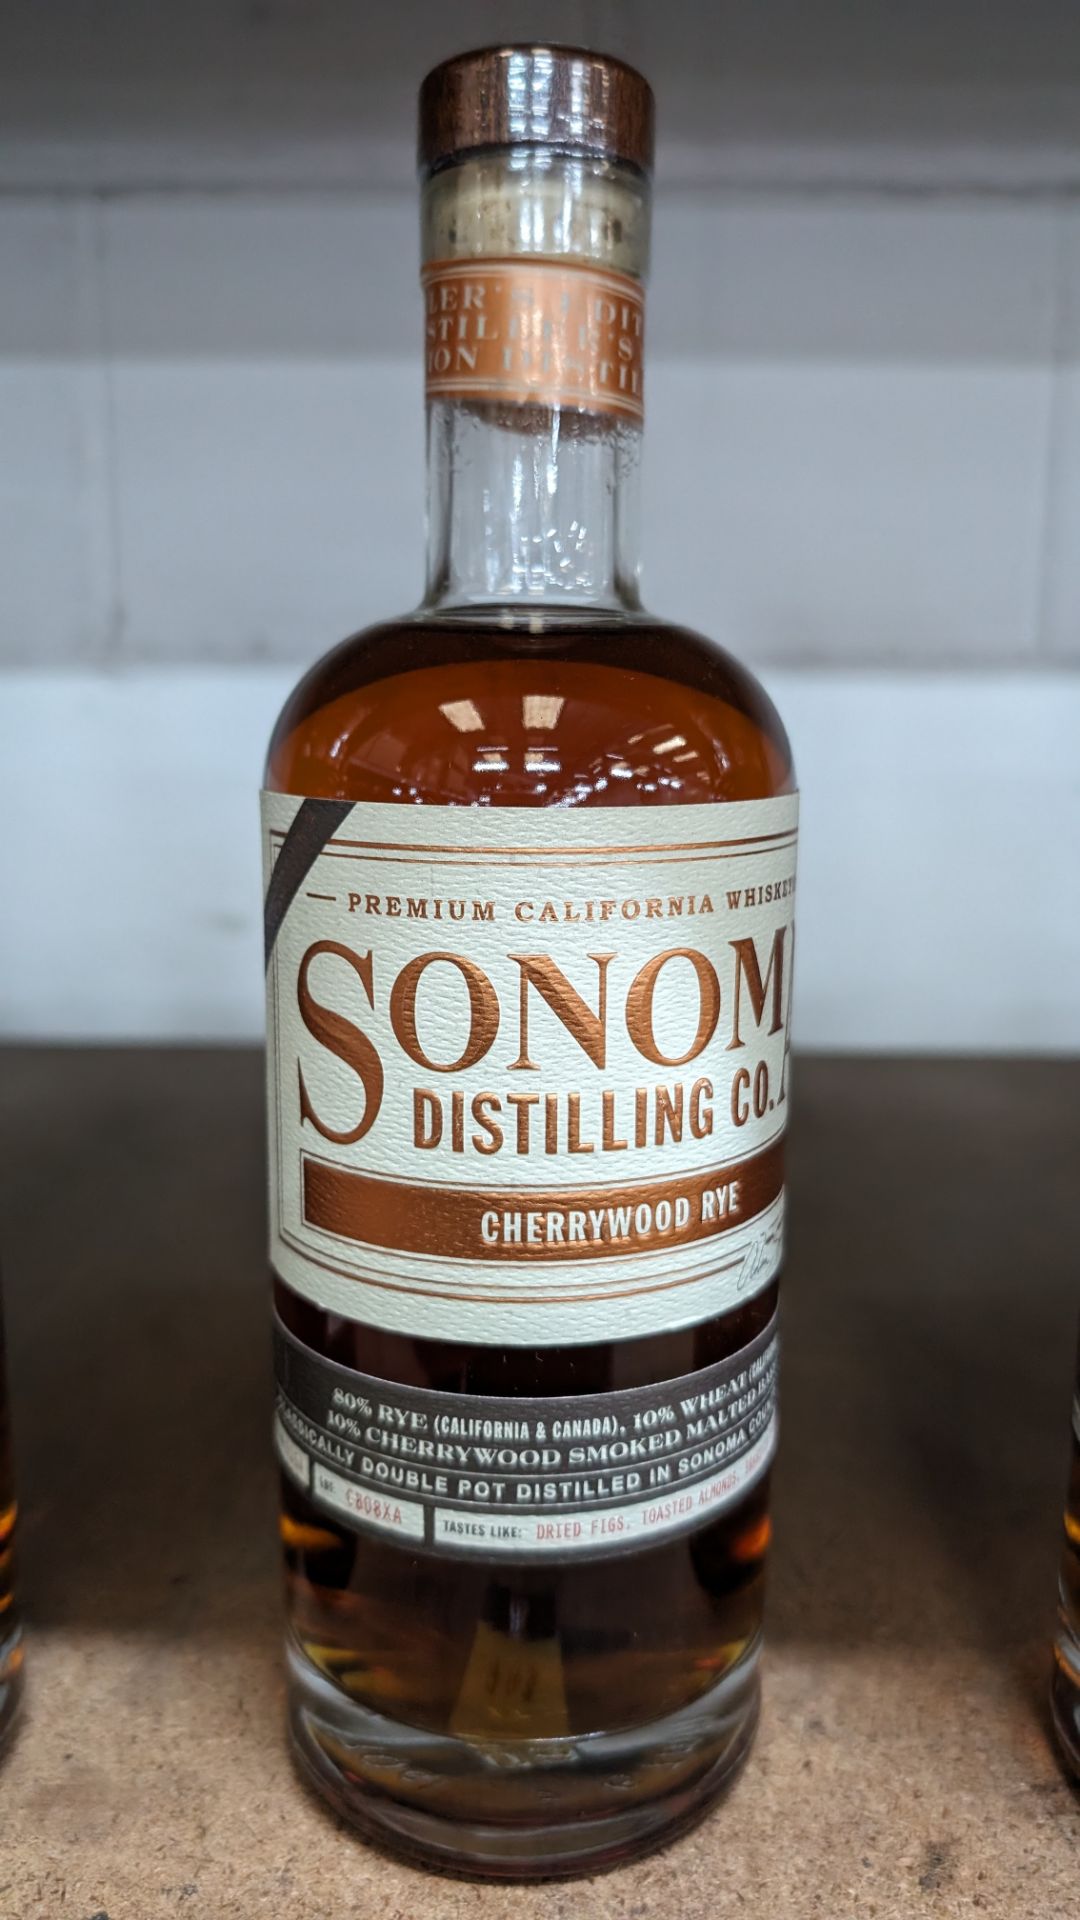 1 off 700ml bottle of Sonoma Cherrywood Rye Whiskey. 47.8% alc/vol (95.6 proof). Distilled and bot - Image 2 of 5